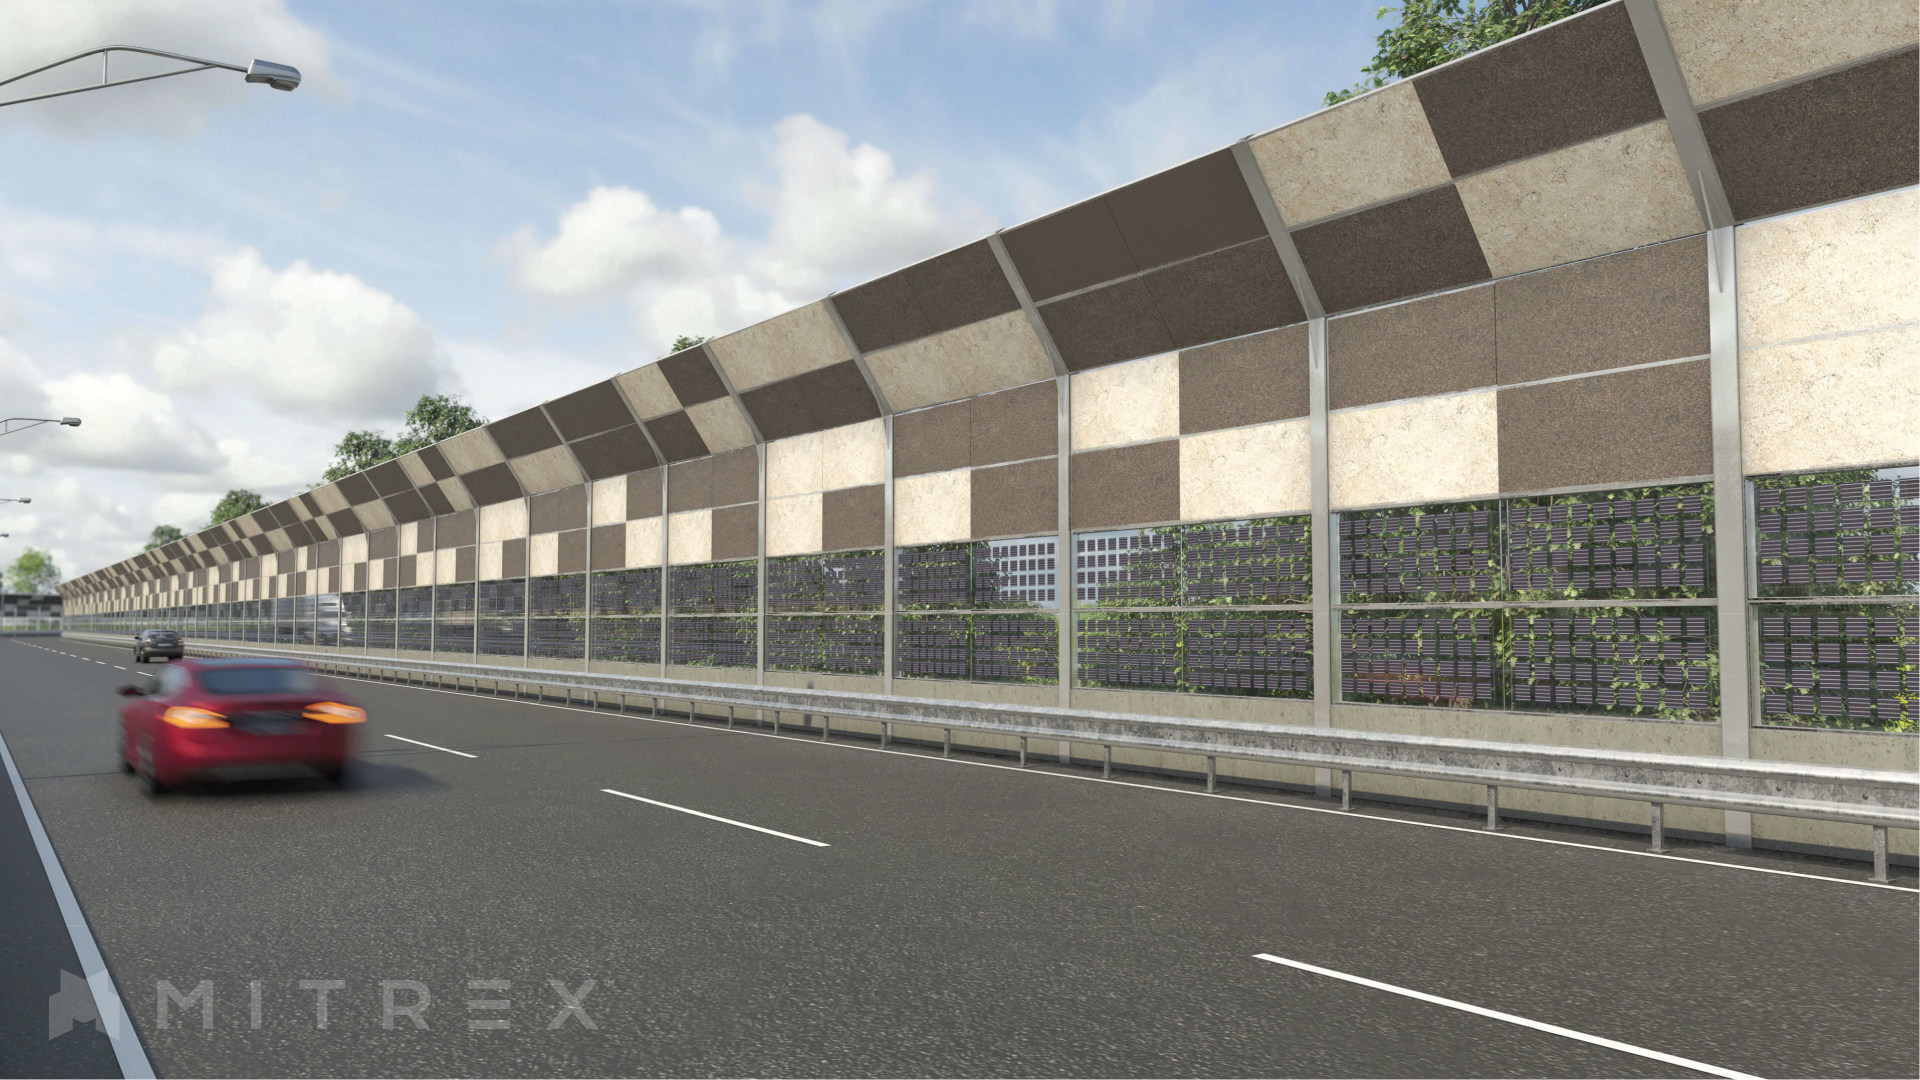 Mitrex – Integrated Solar Technology-Sustainable roads of the fu